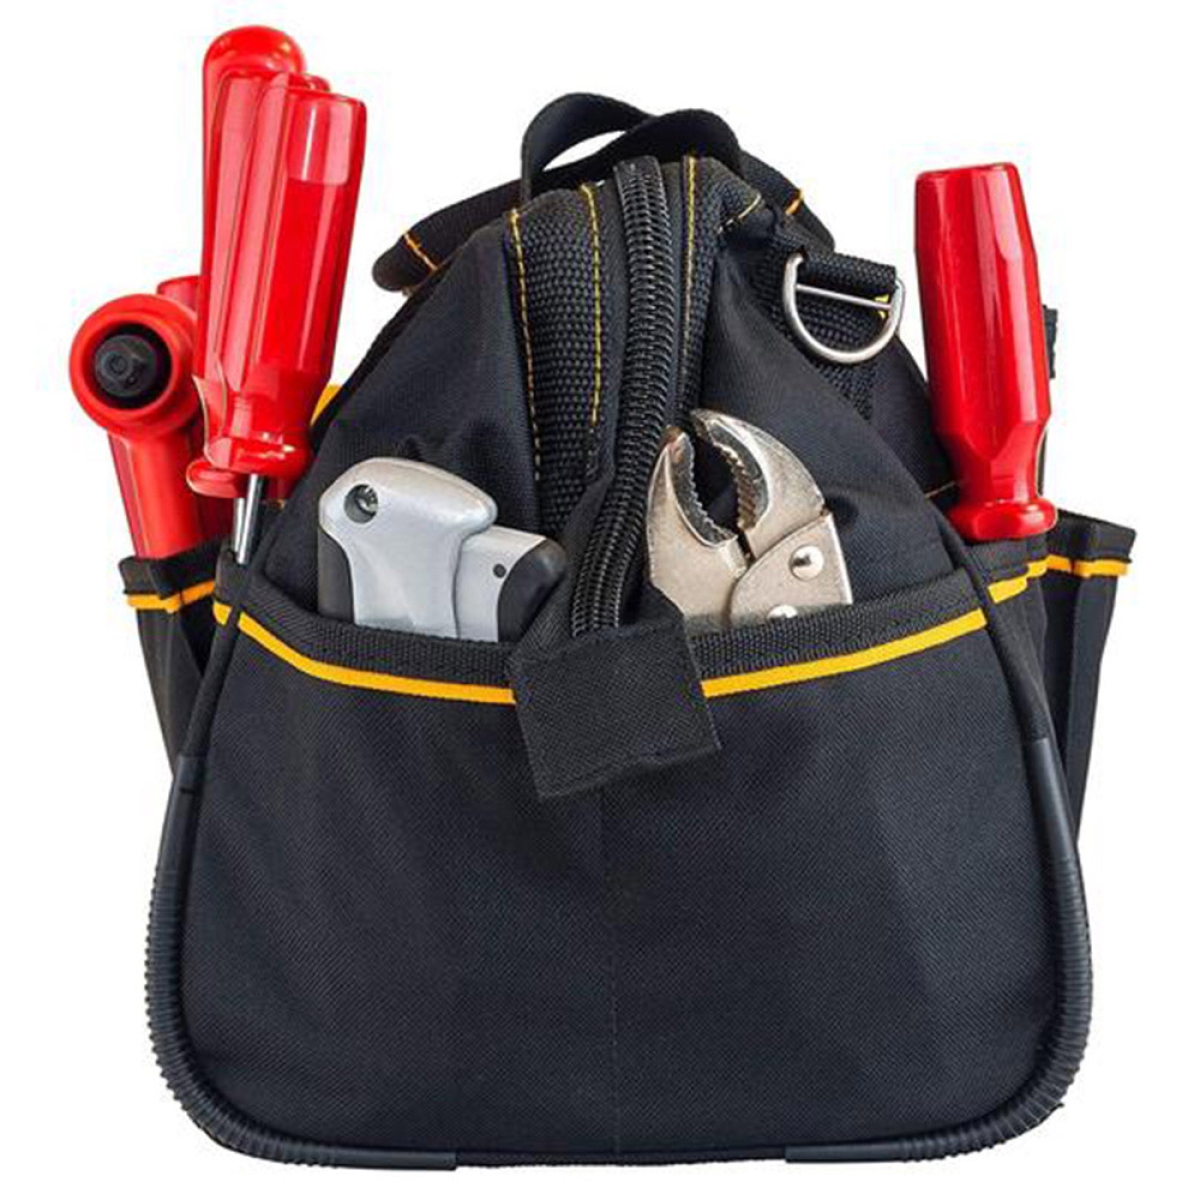 CAT® Wide Mouth Tool Bag Large 23L